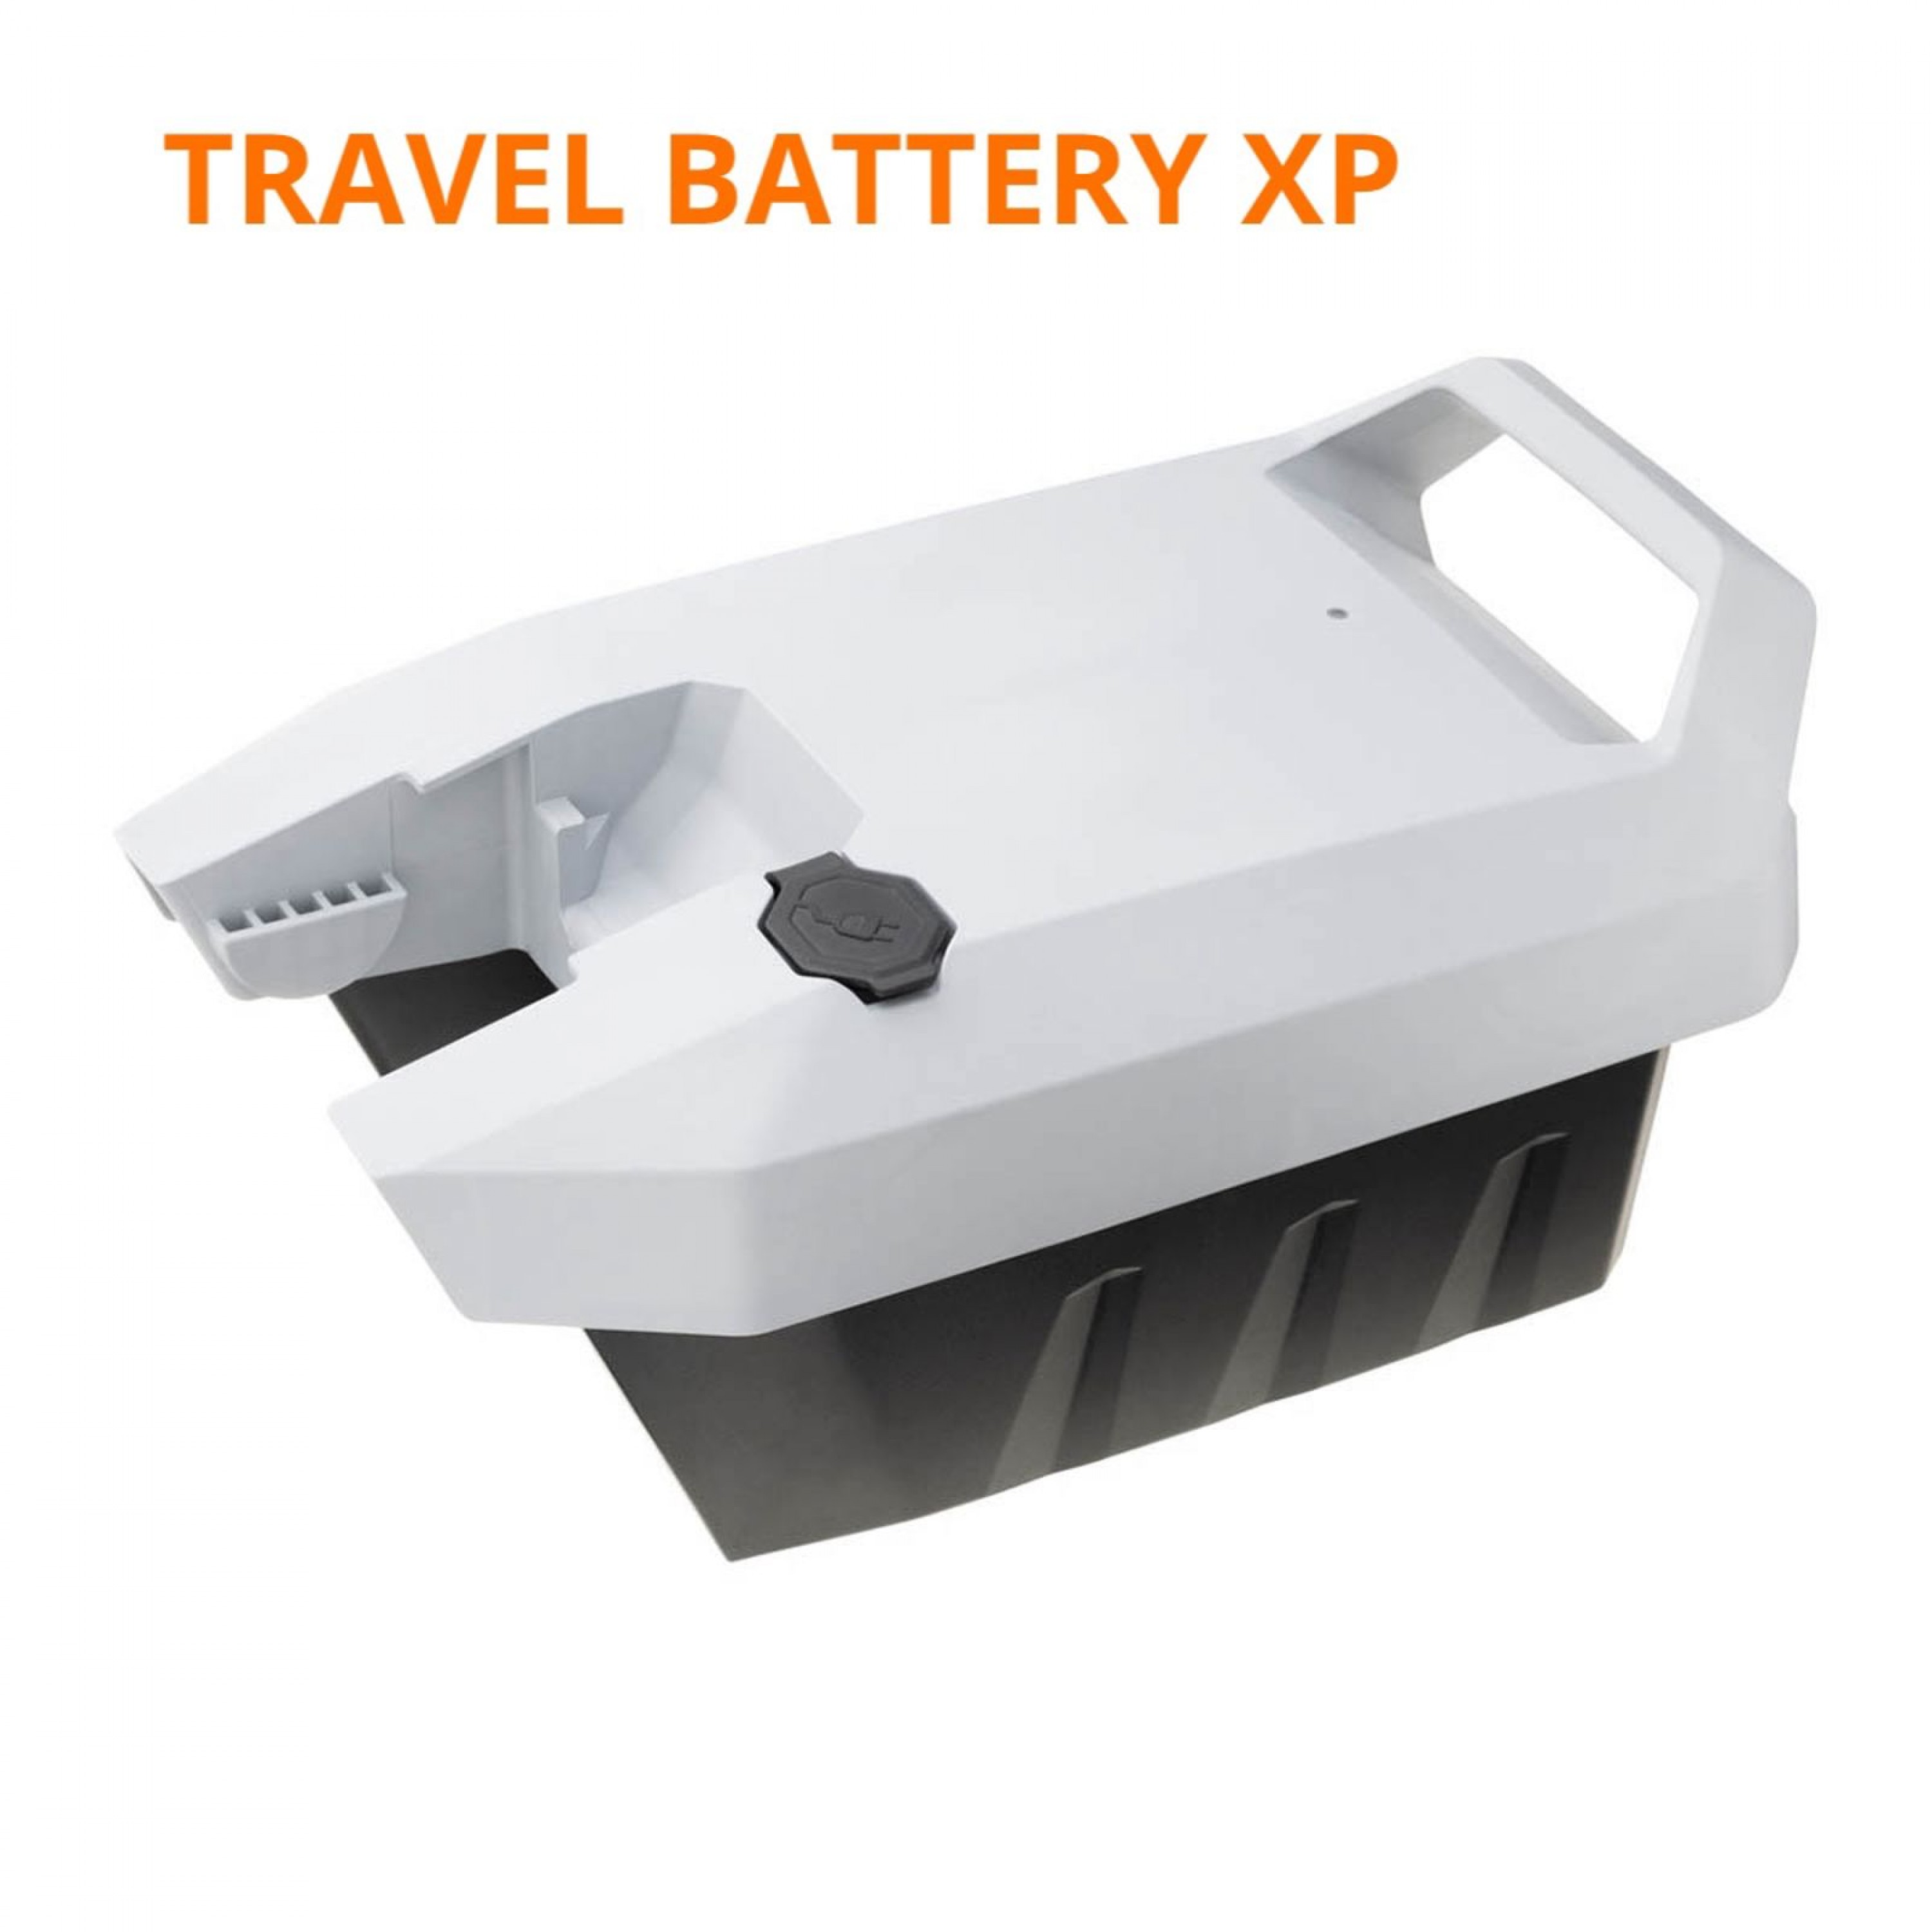 TRAVEL BATTERY XP 1425WH, FOR TRAVEL RANGE OR POWER PACKAGES (MOTORS 1160-00 THRU 1165-00 AND 1421-00)